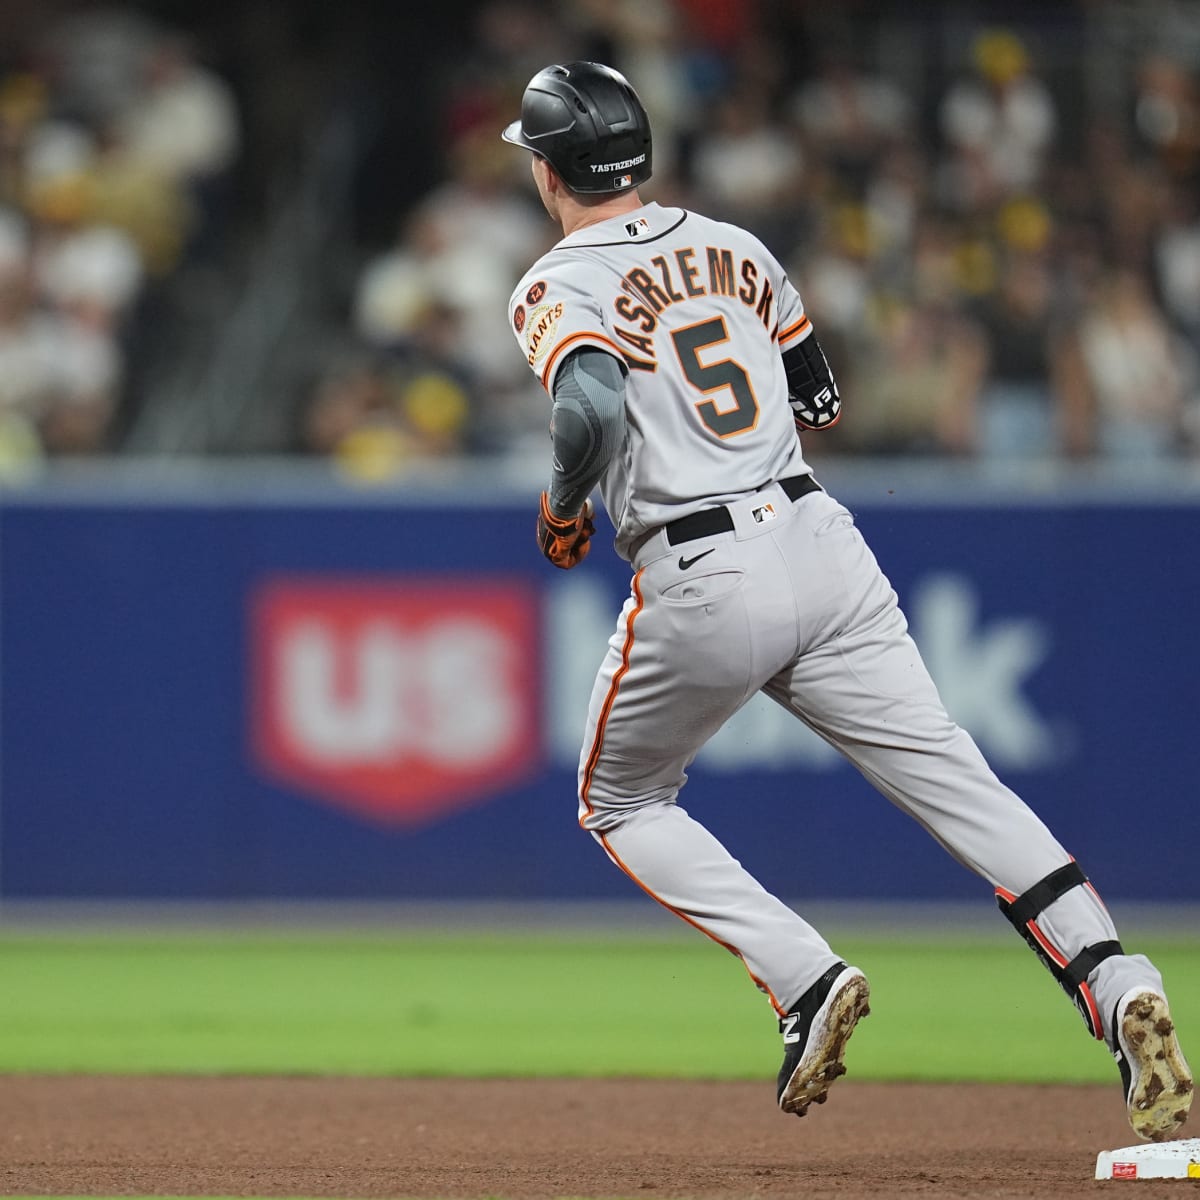 Giants score 12 runs vs. Padres after team home run derby